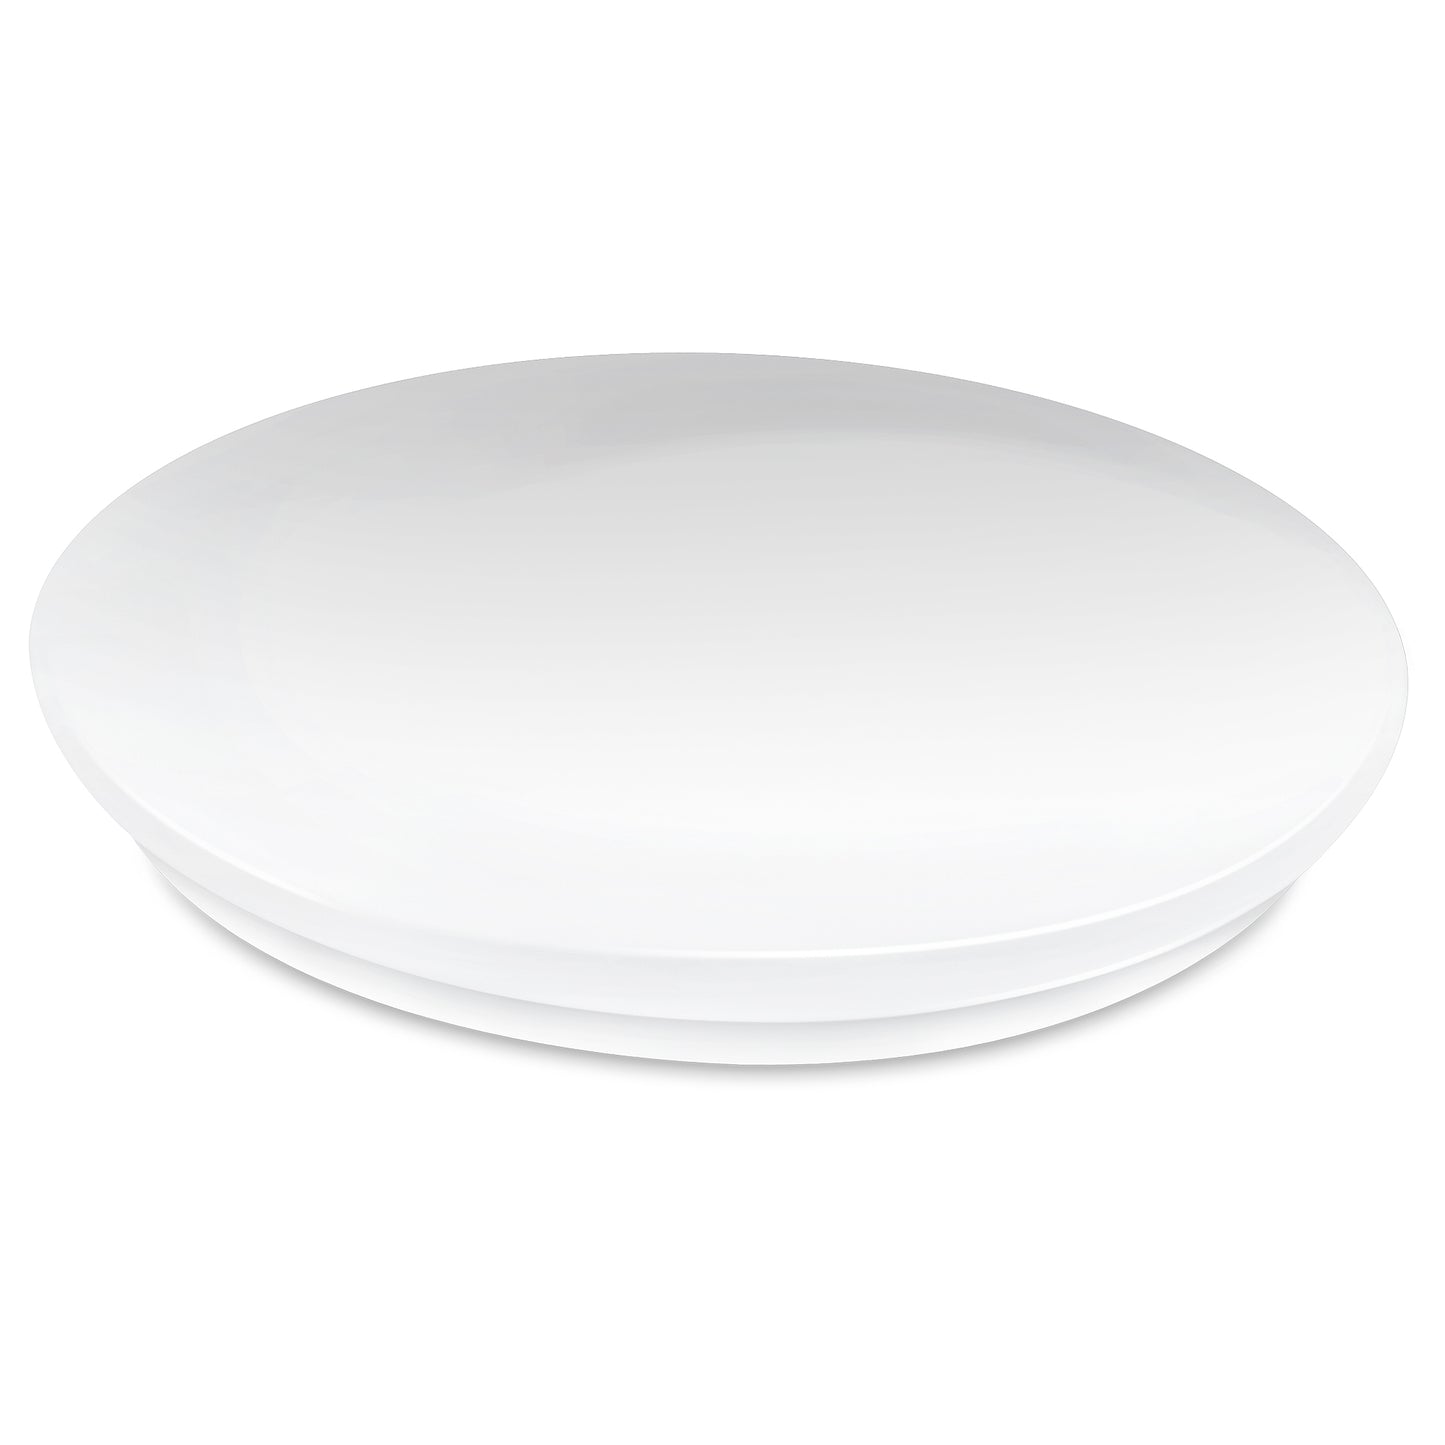 LUMINAIRE LED ROND MATEL EXTRA-PLAT 24W FROID 